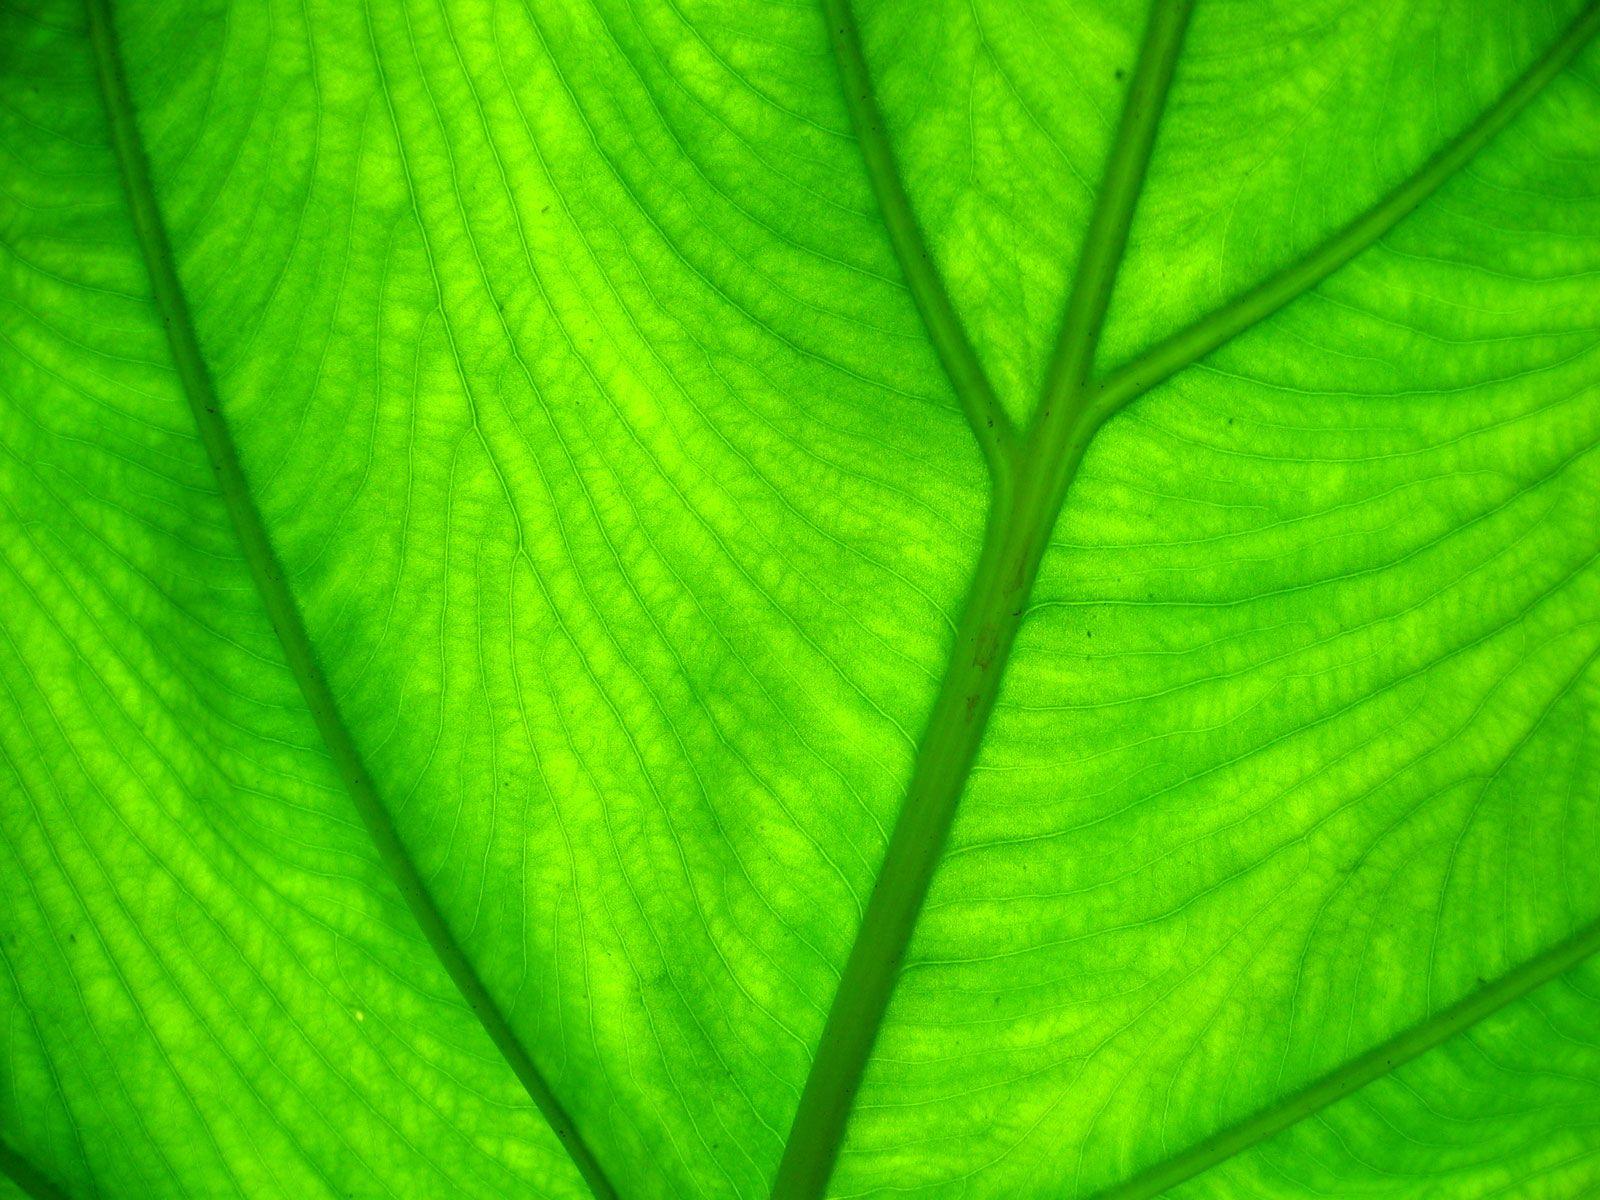 Viewing image Wallpaper green background through leaf